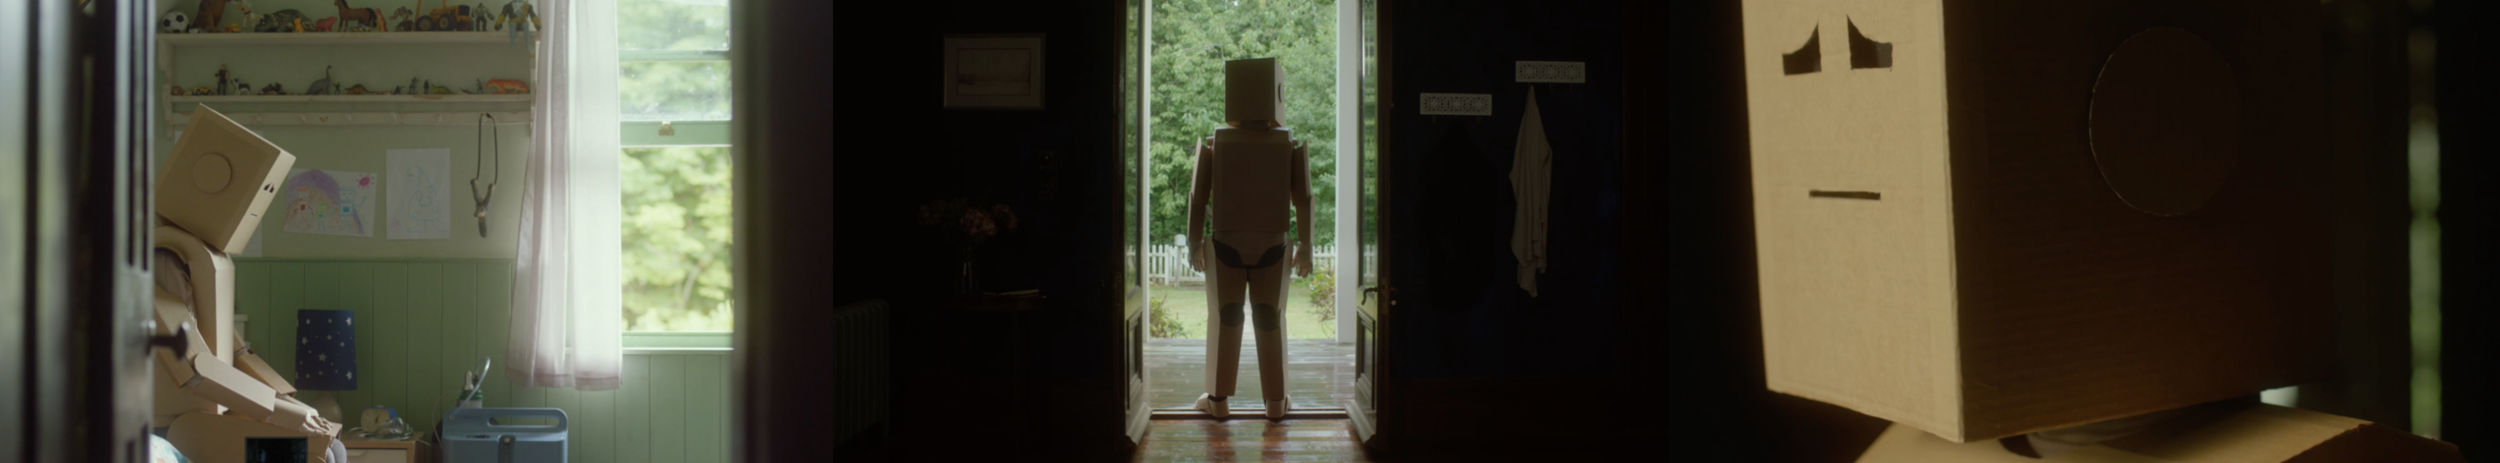 MY OTHER SUIT IS HUMAN (SHORT, UK 2019)